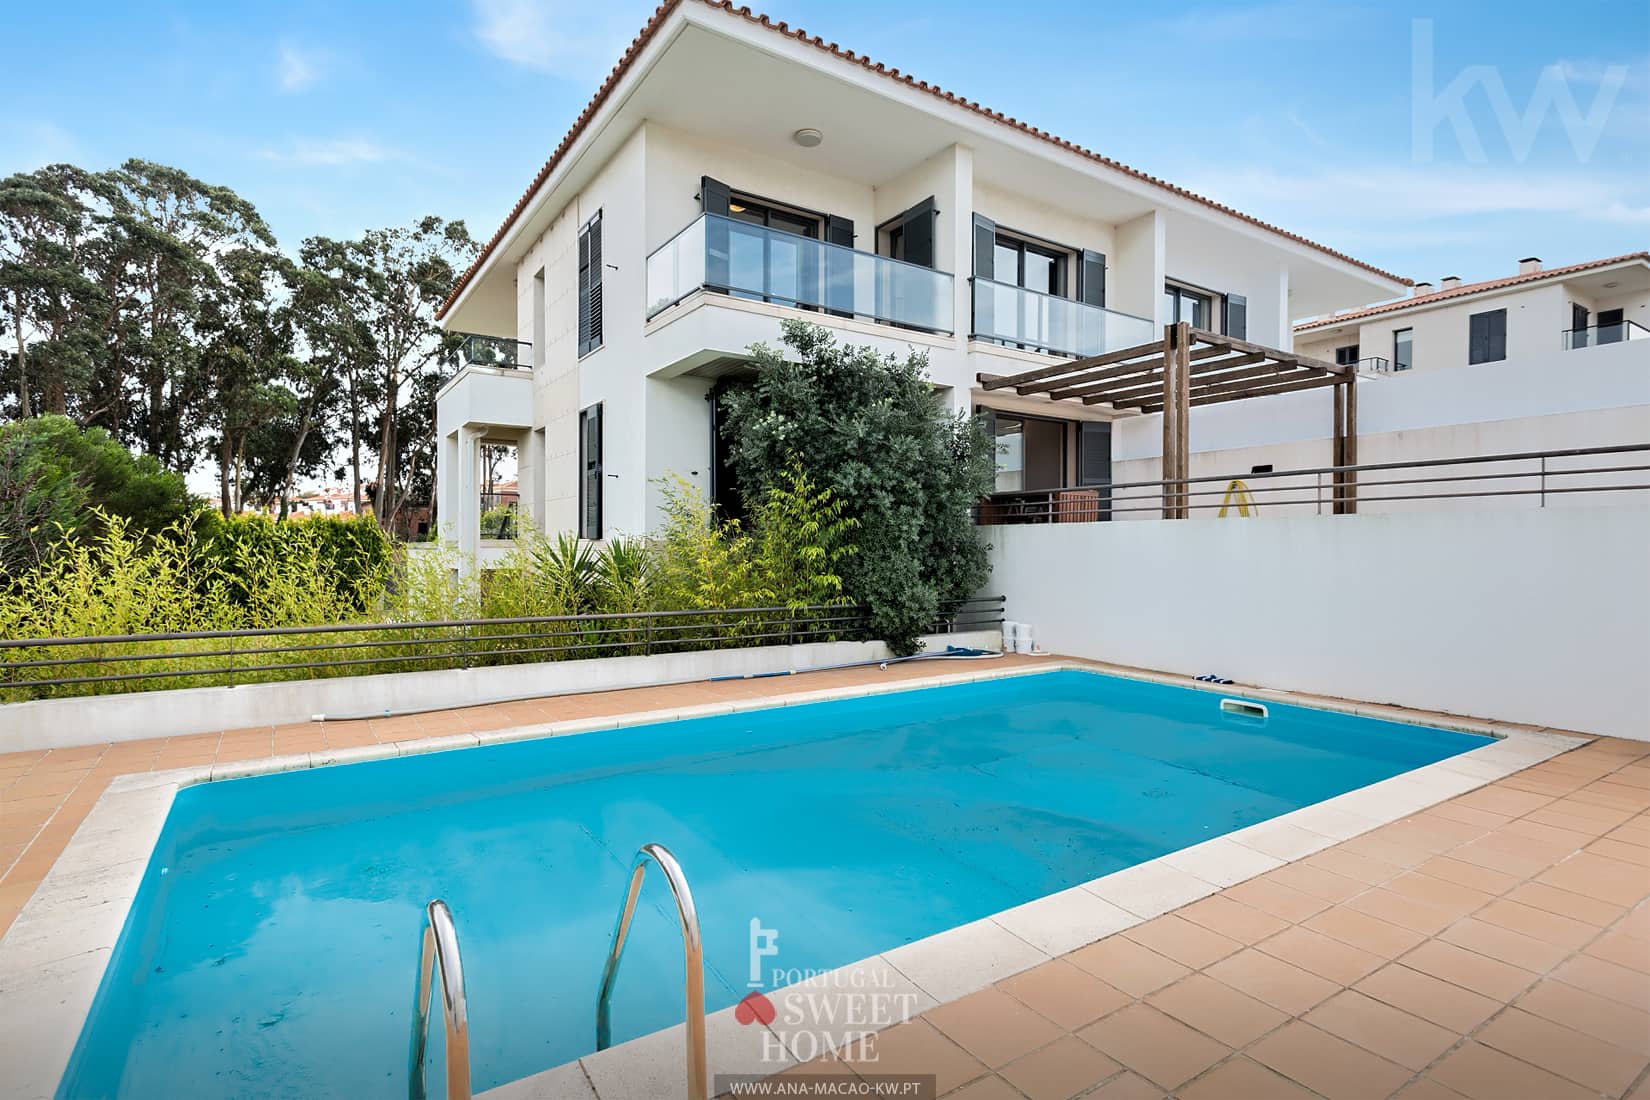 Oeiras Golf & Residence - Bright 4 bedroom villa with garden and pool